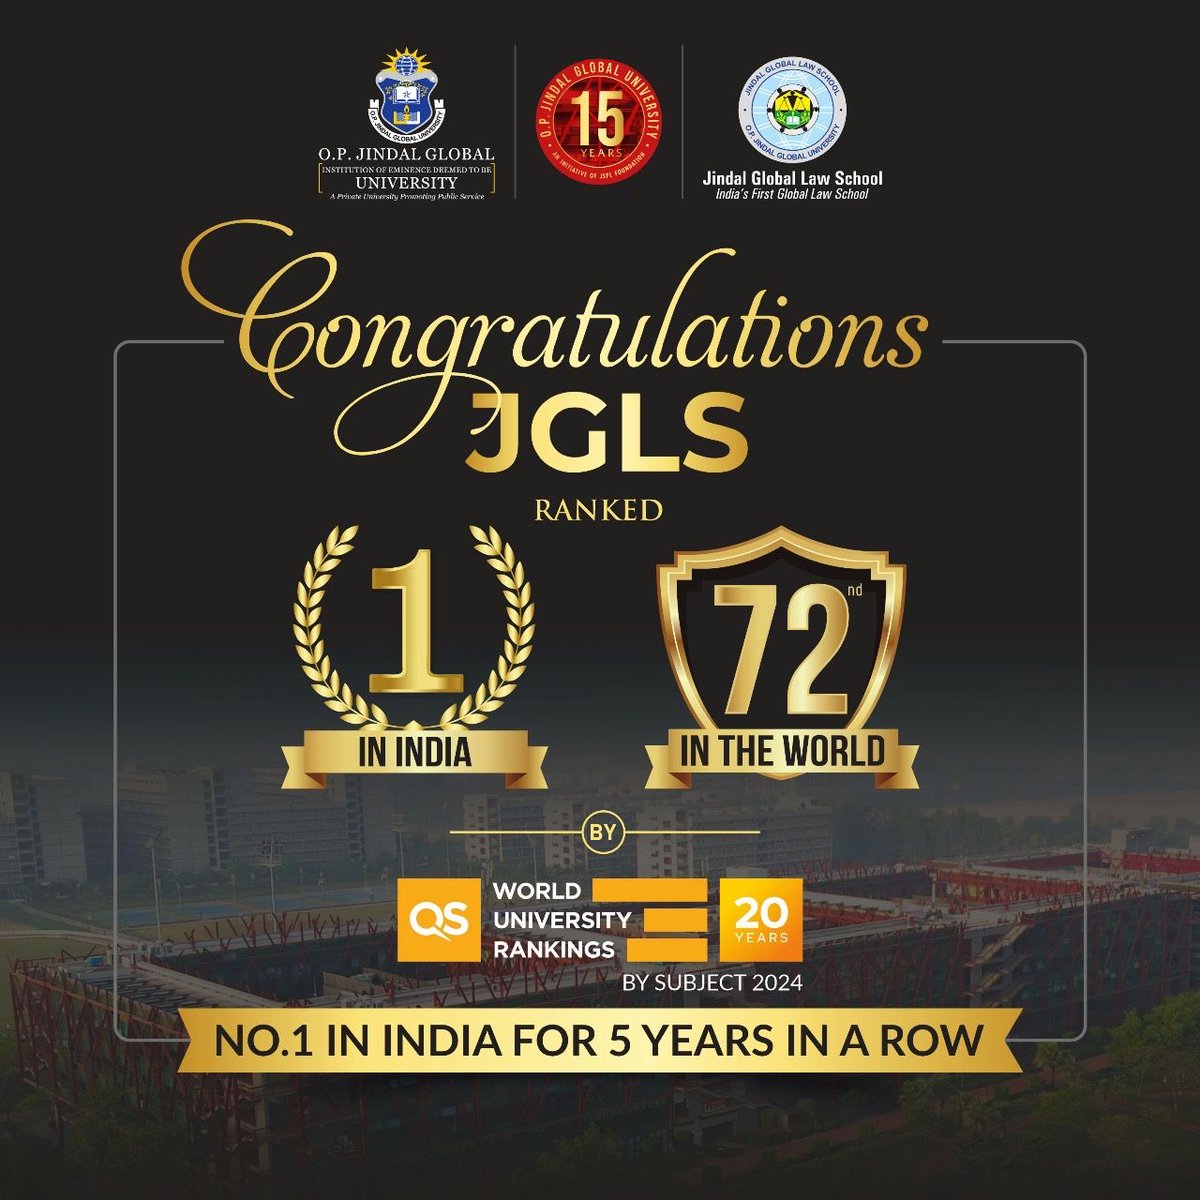 Five years at the top in India is impressive. JGLS's ranking journey shows they're hungry for even greater success. #JGLSNumber1